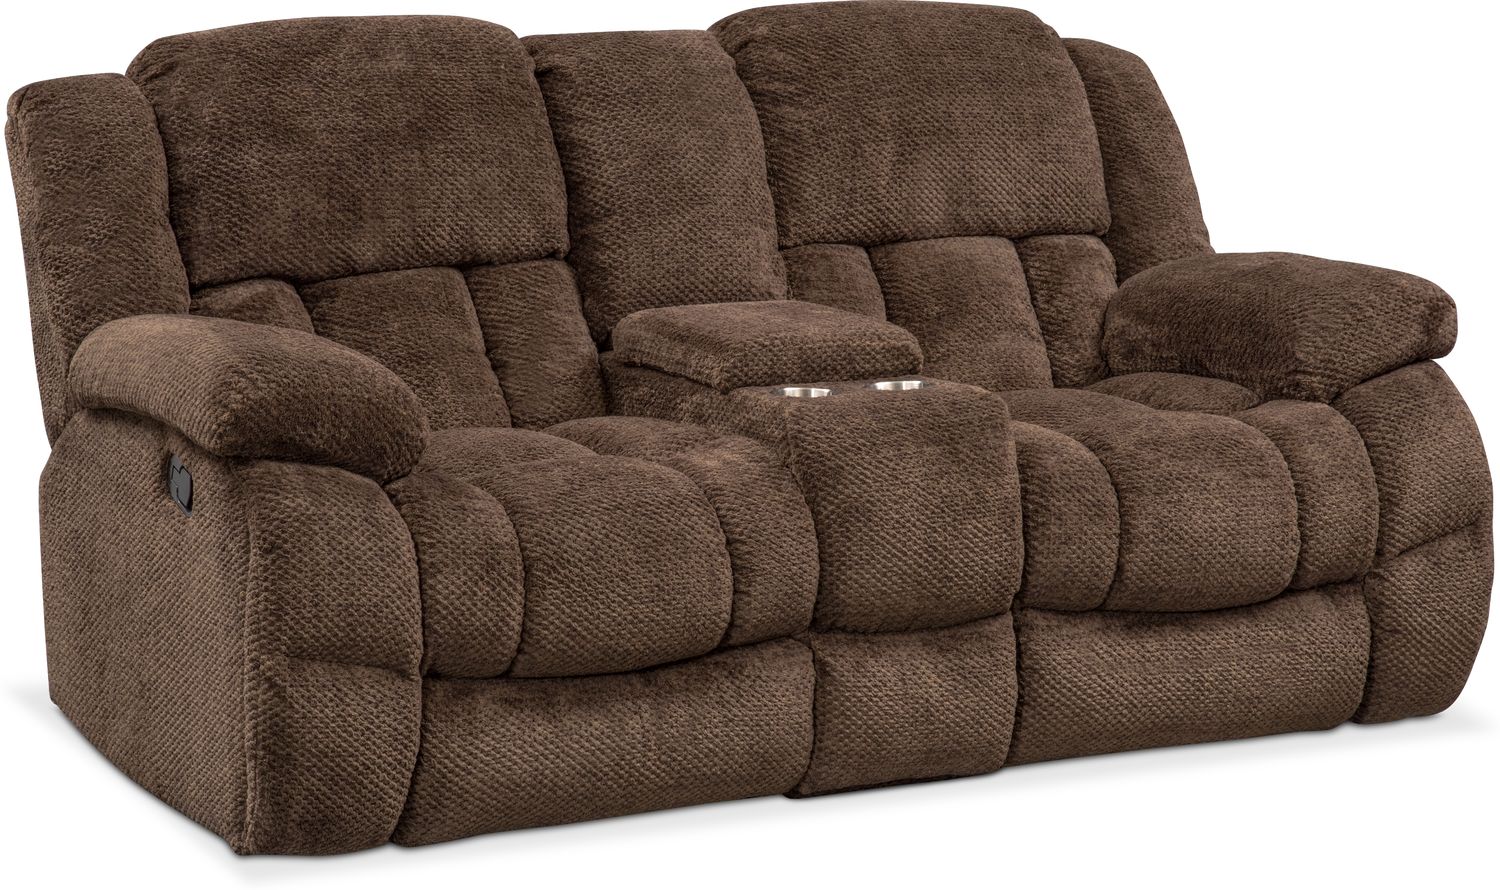 Come closer, with a dual reclining loveseat!